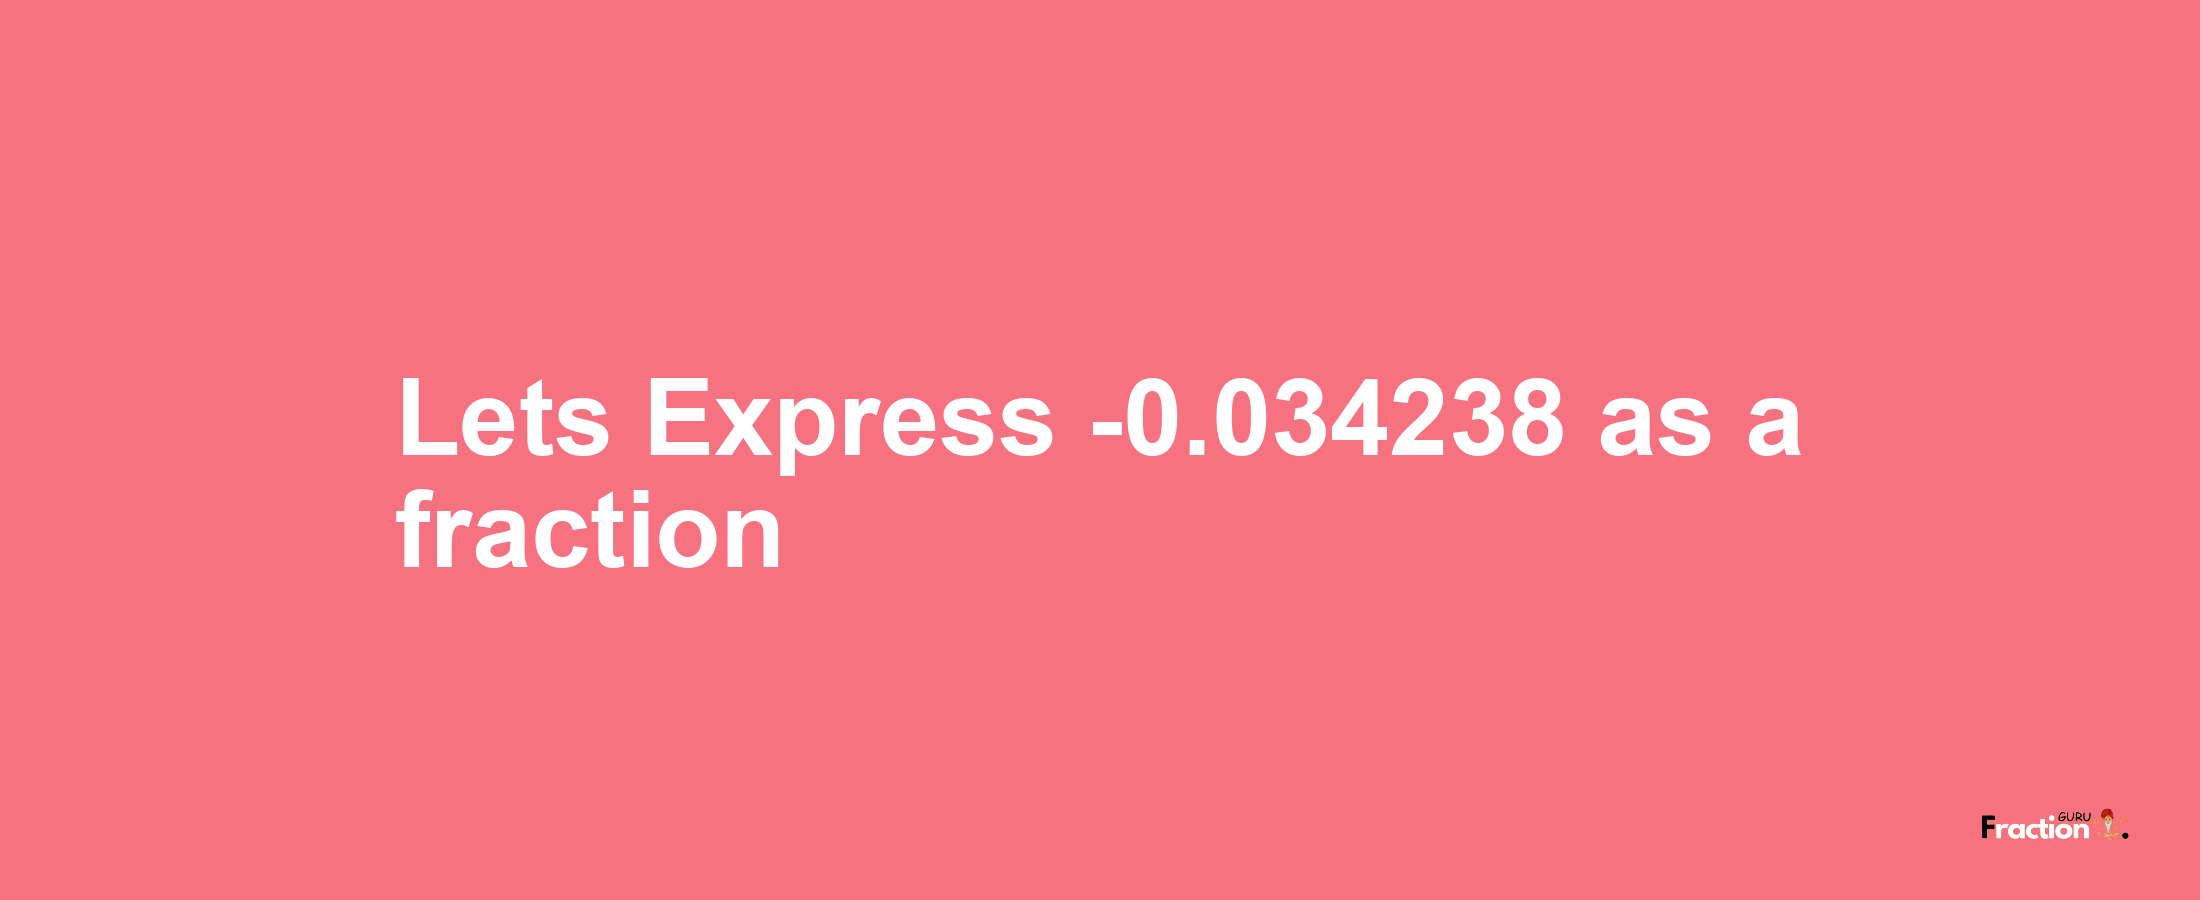 Lets Express -0.034238 as afraction